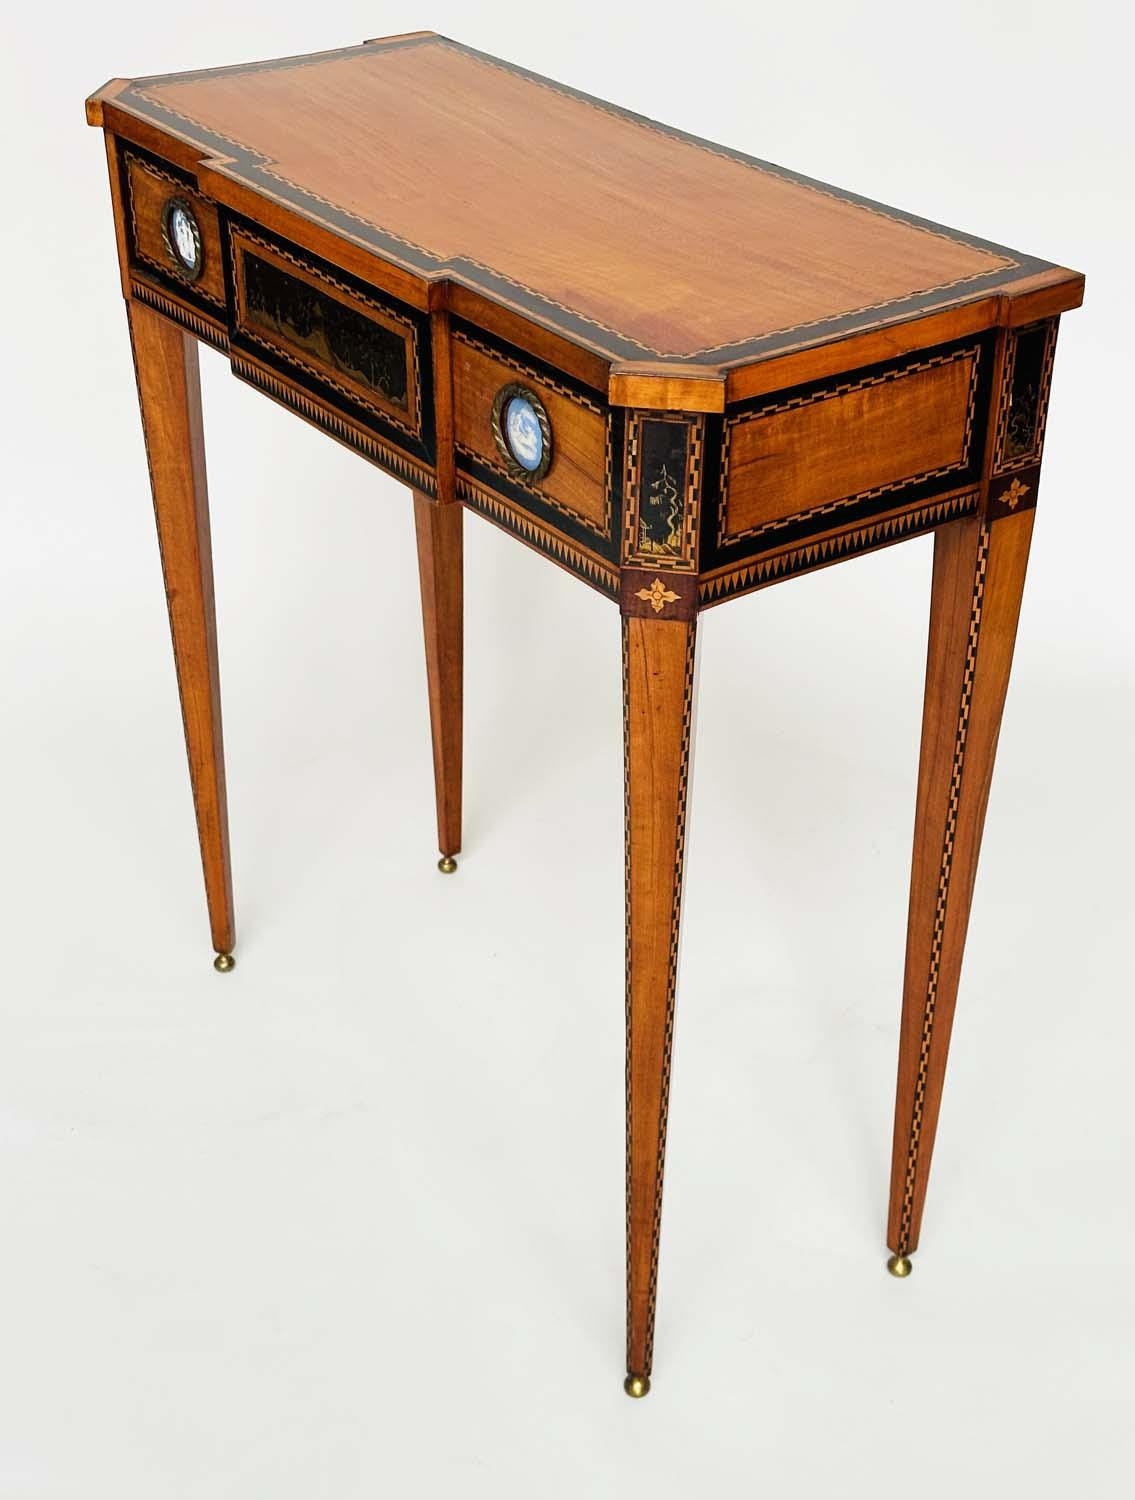 DUTCH HALL TABLE, early 19th century satinwood and ebony of breakfront form with full width frieze - Image 4 of 8